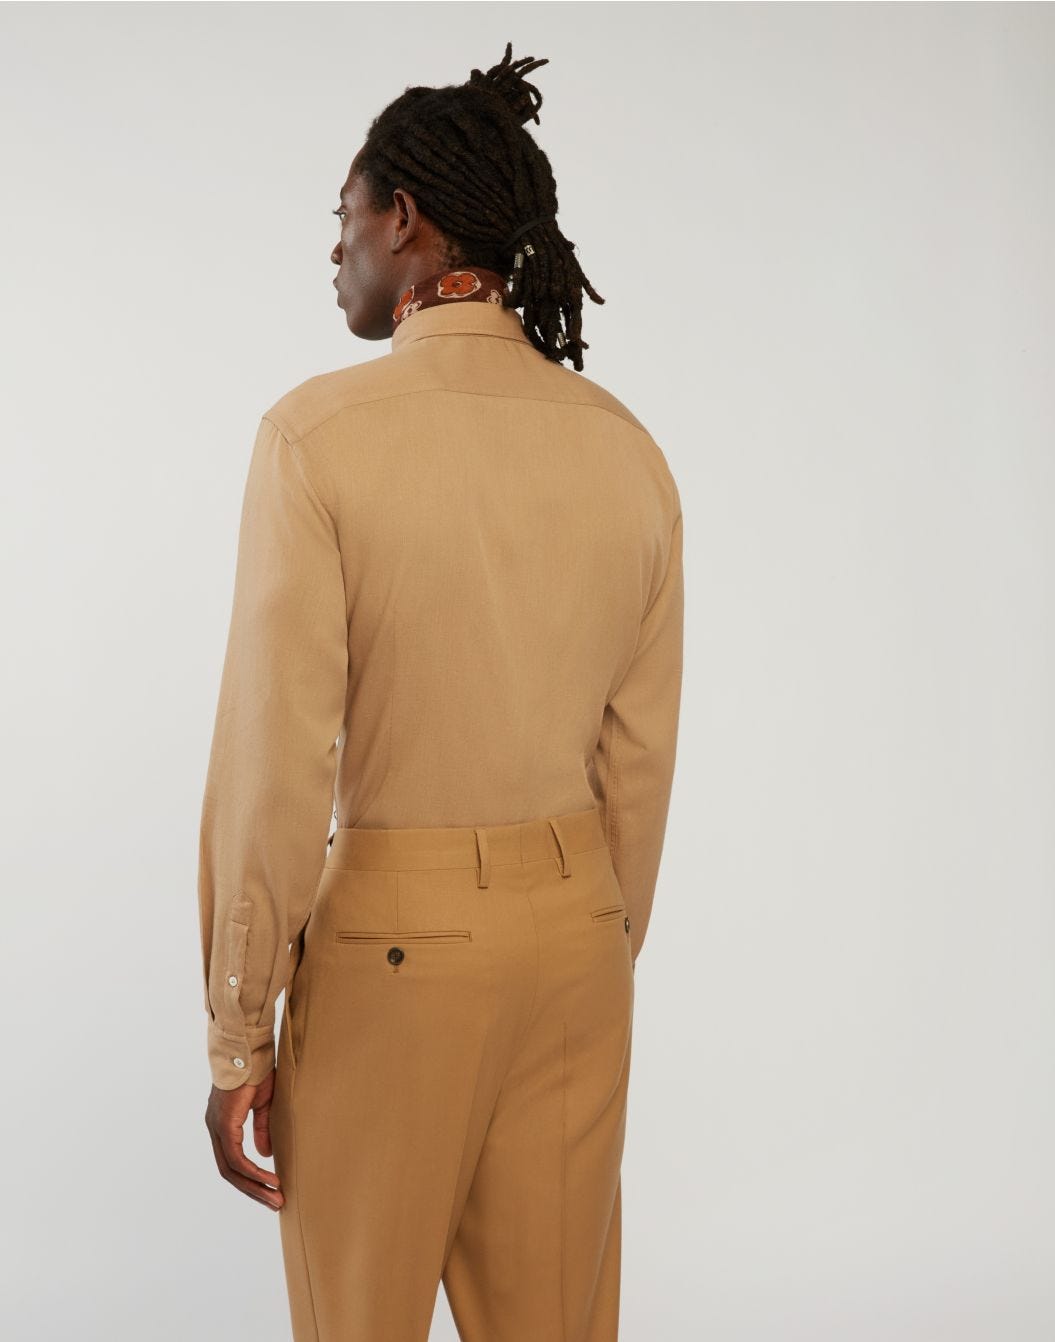 Camel-brown shirt in twilled cotton